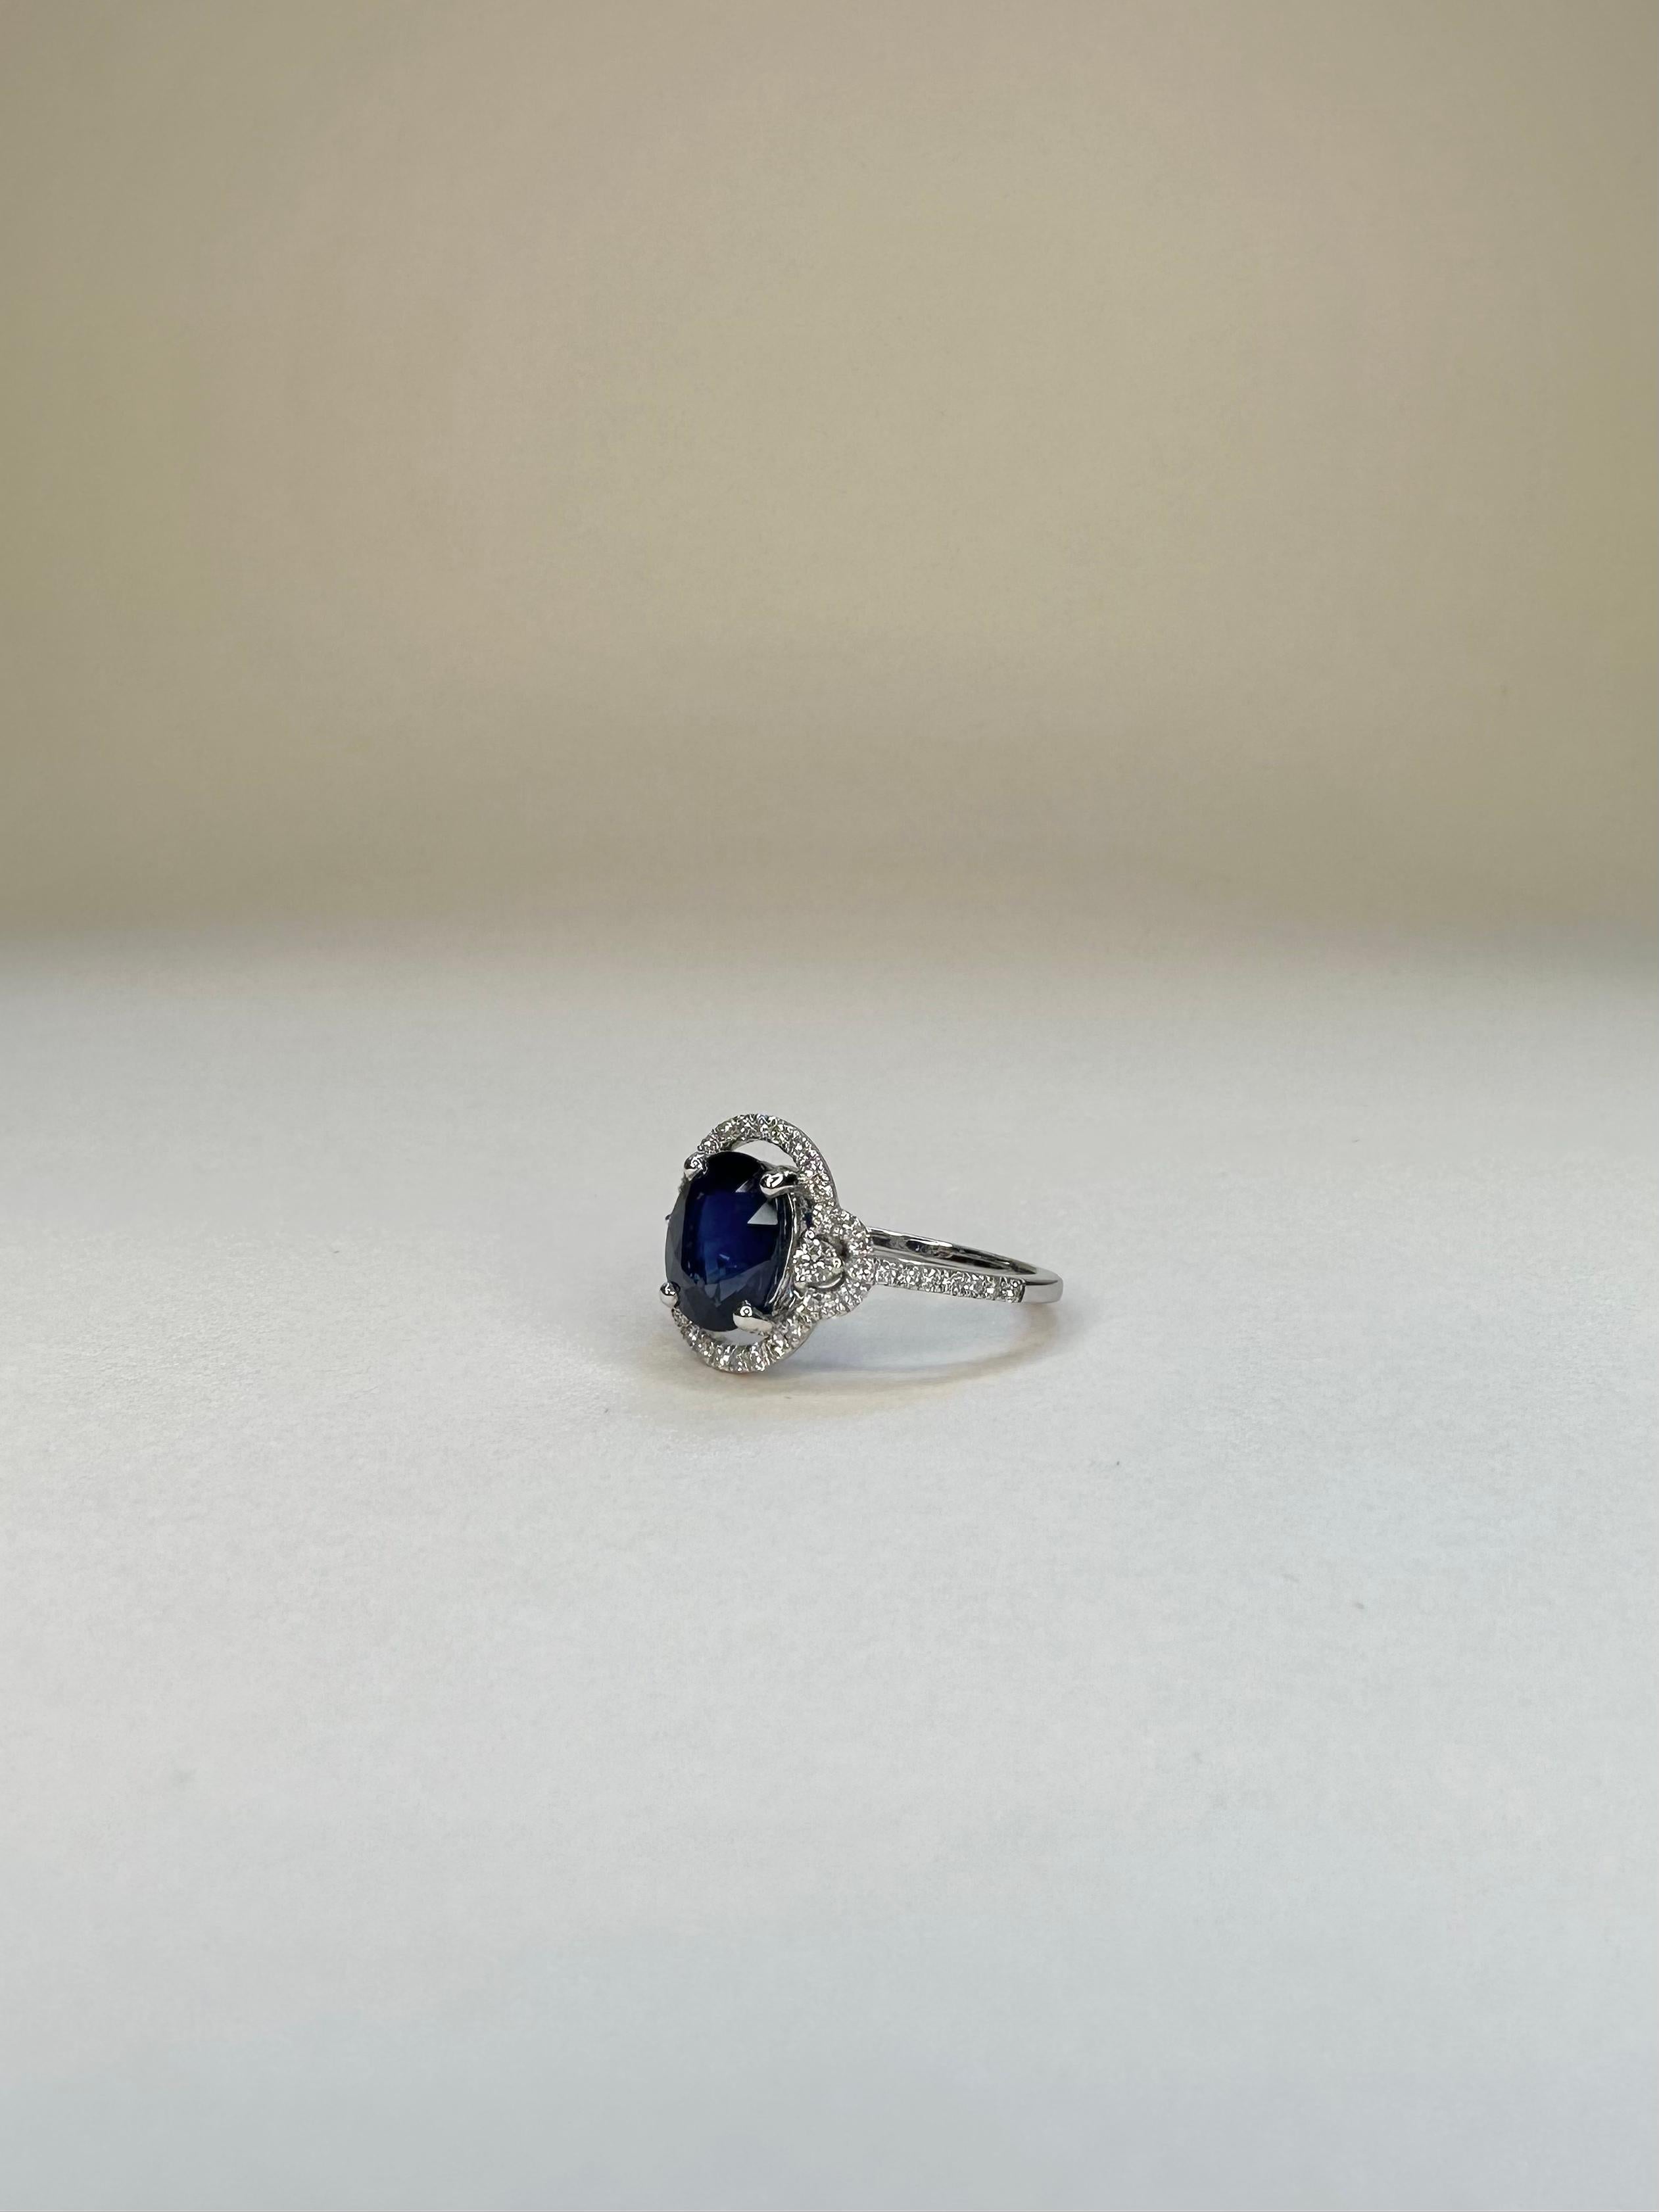 For Sale:  18k White Gold 3.08 Carat Royal Blue Oval Sapphire Ring 0.46 Cts of Diamonds 4